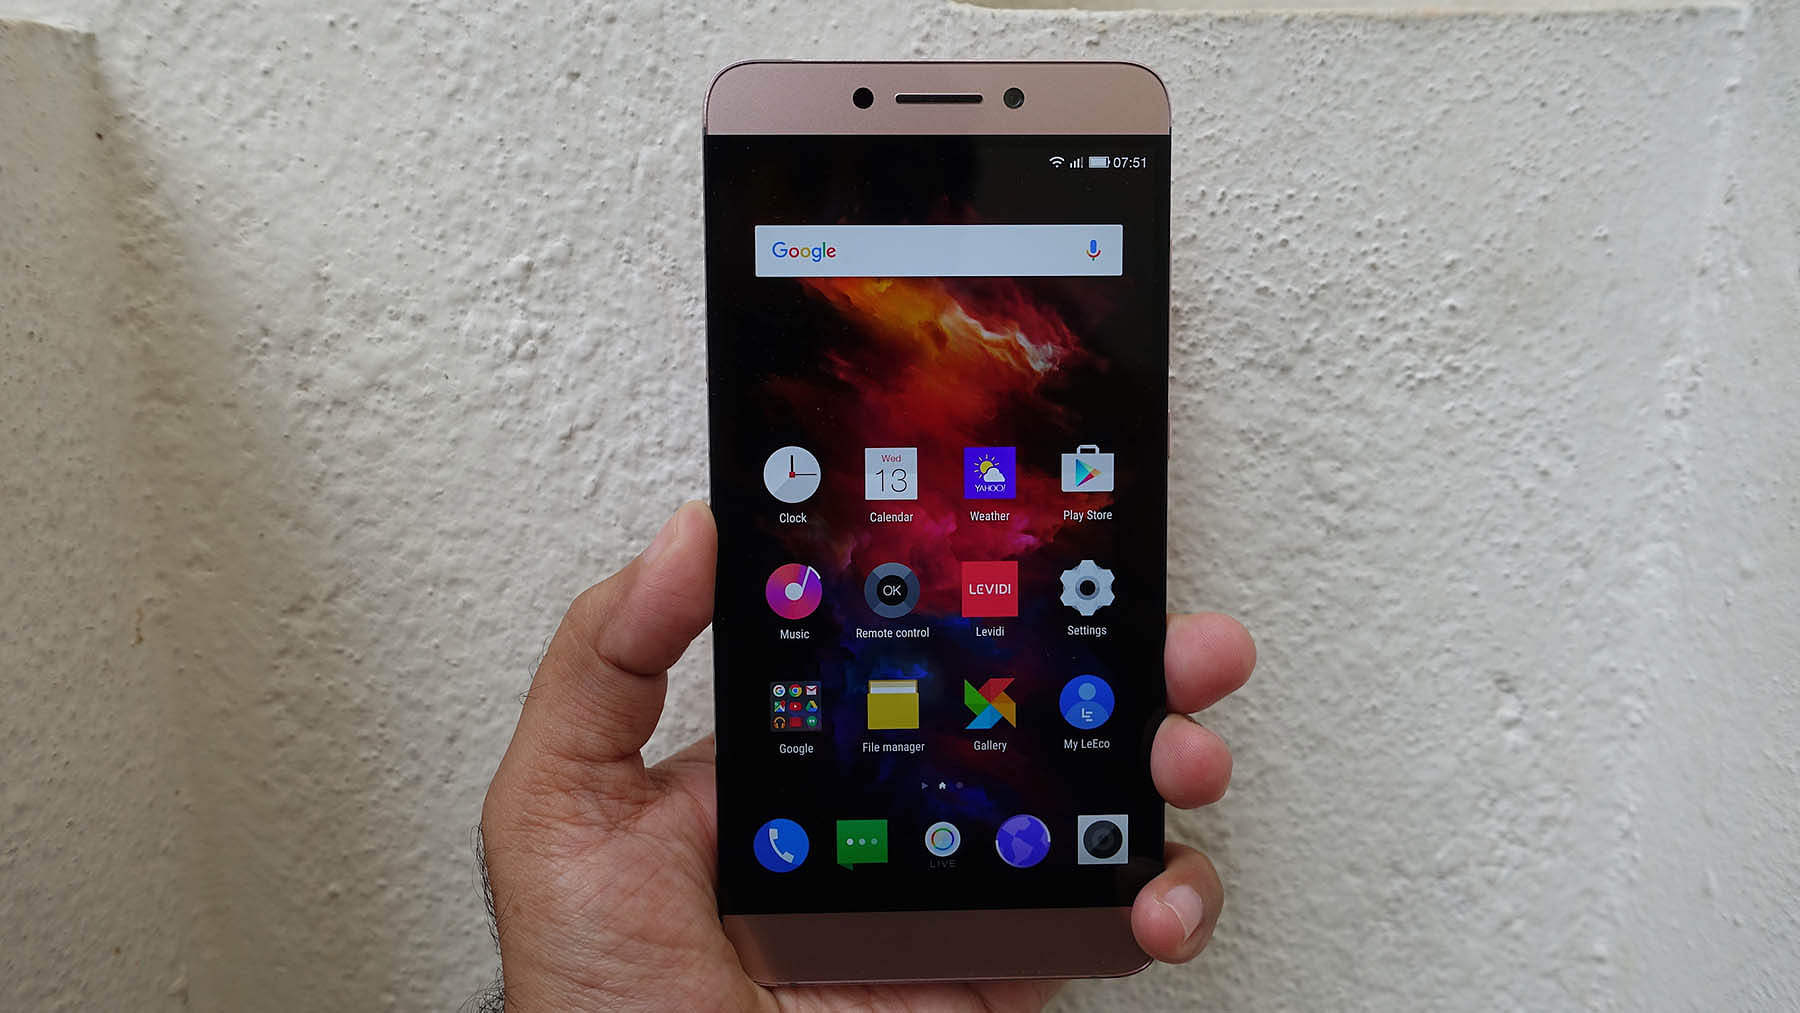 Reliance Jio could try its luck again with affordable smartphones.